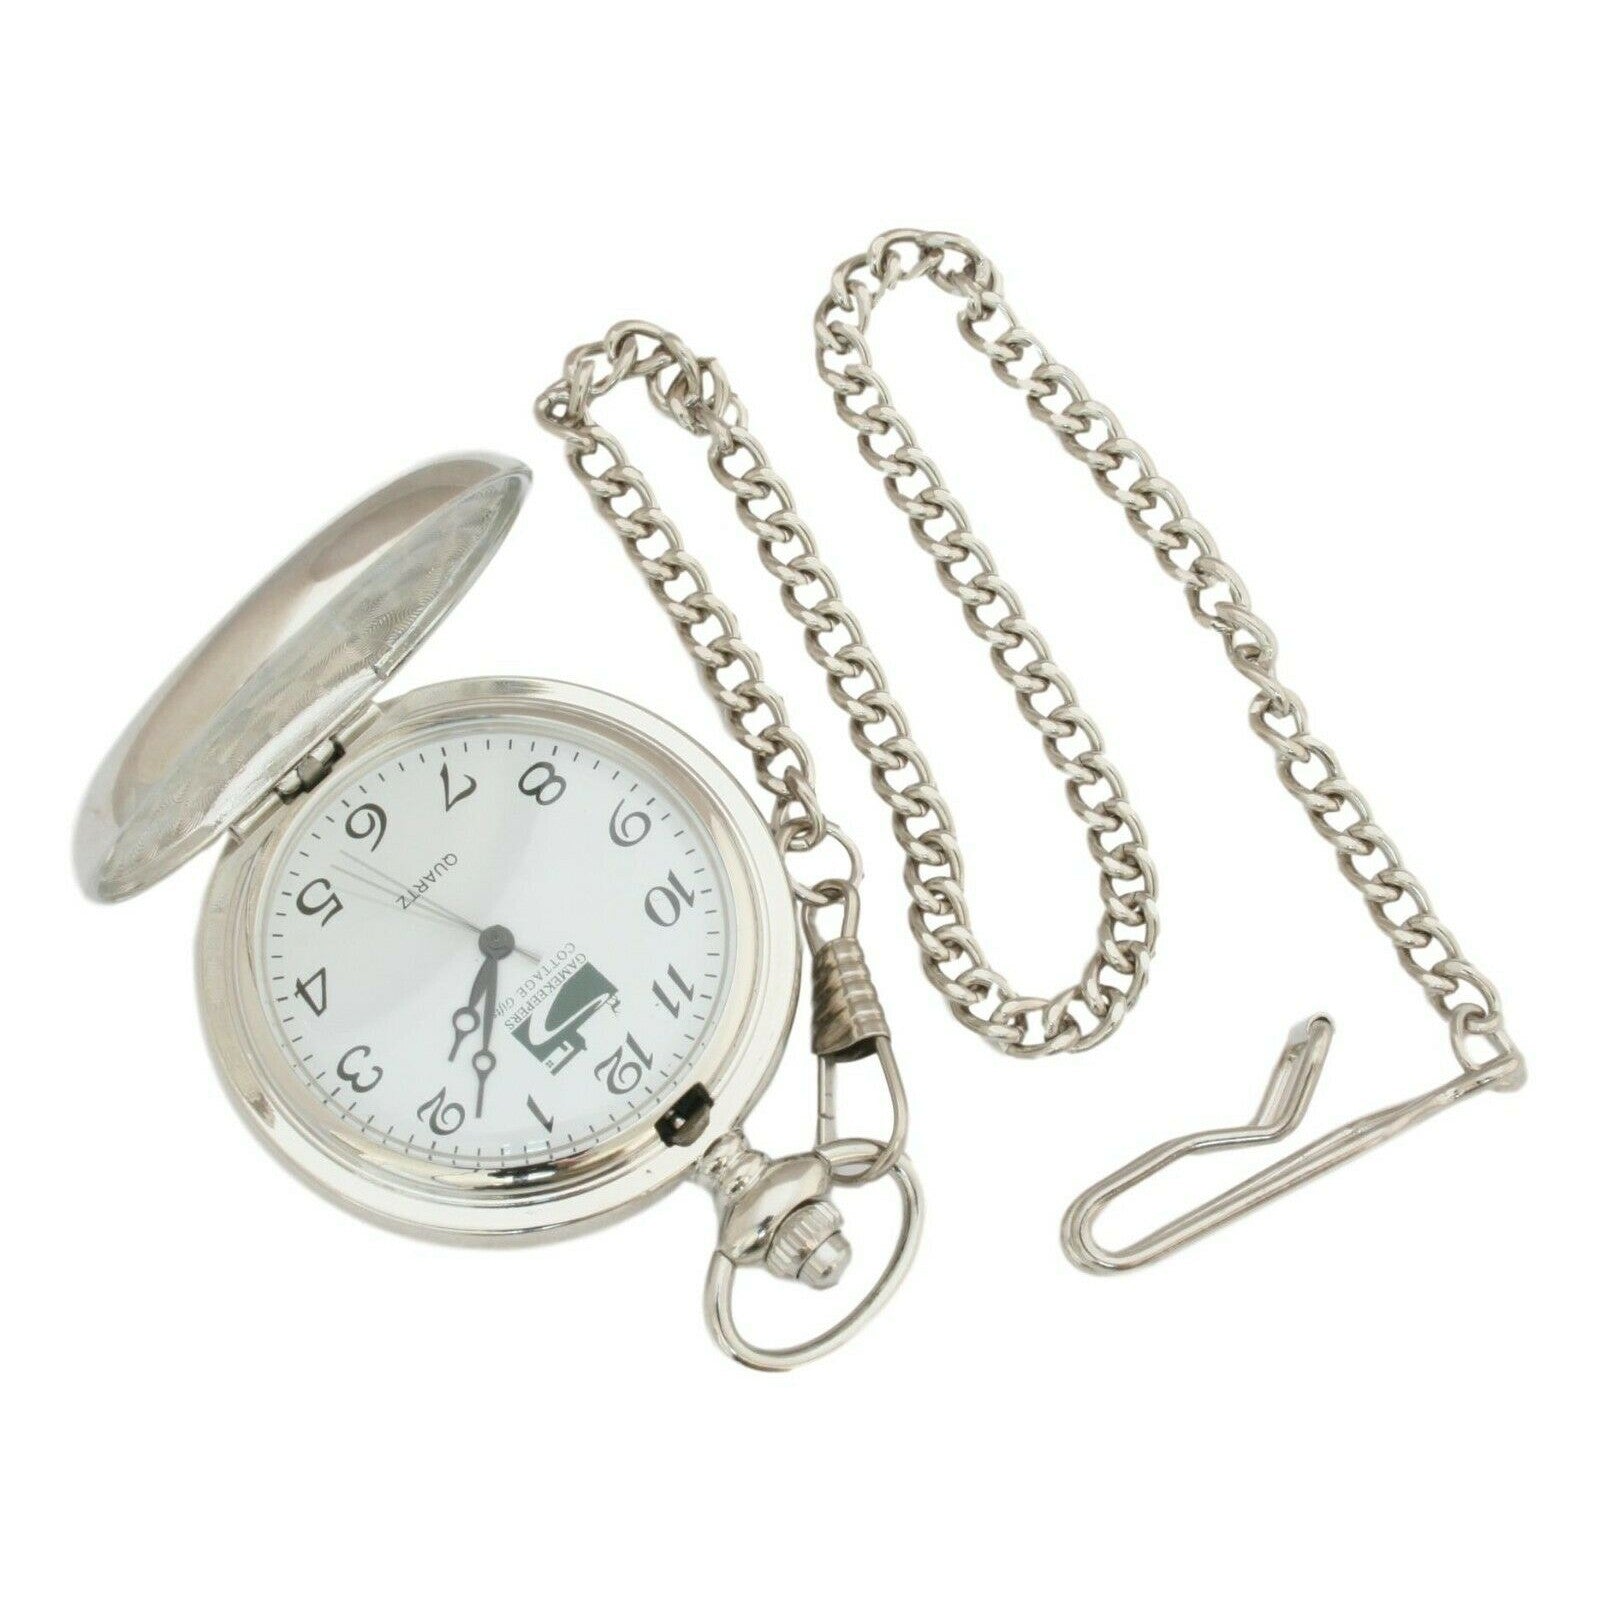 Stag Hunting Pocket Watch